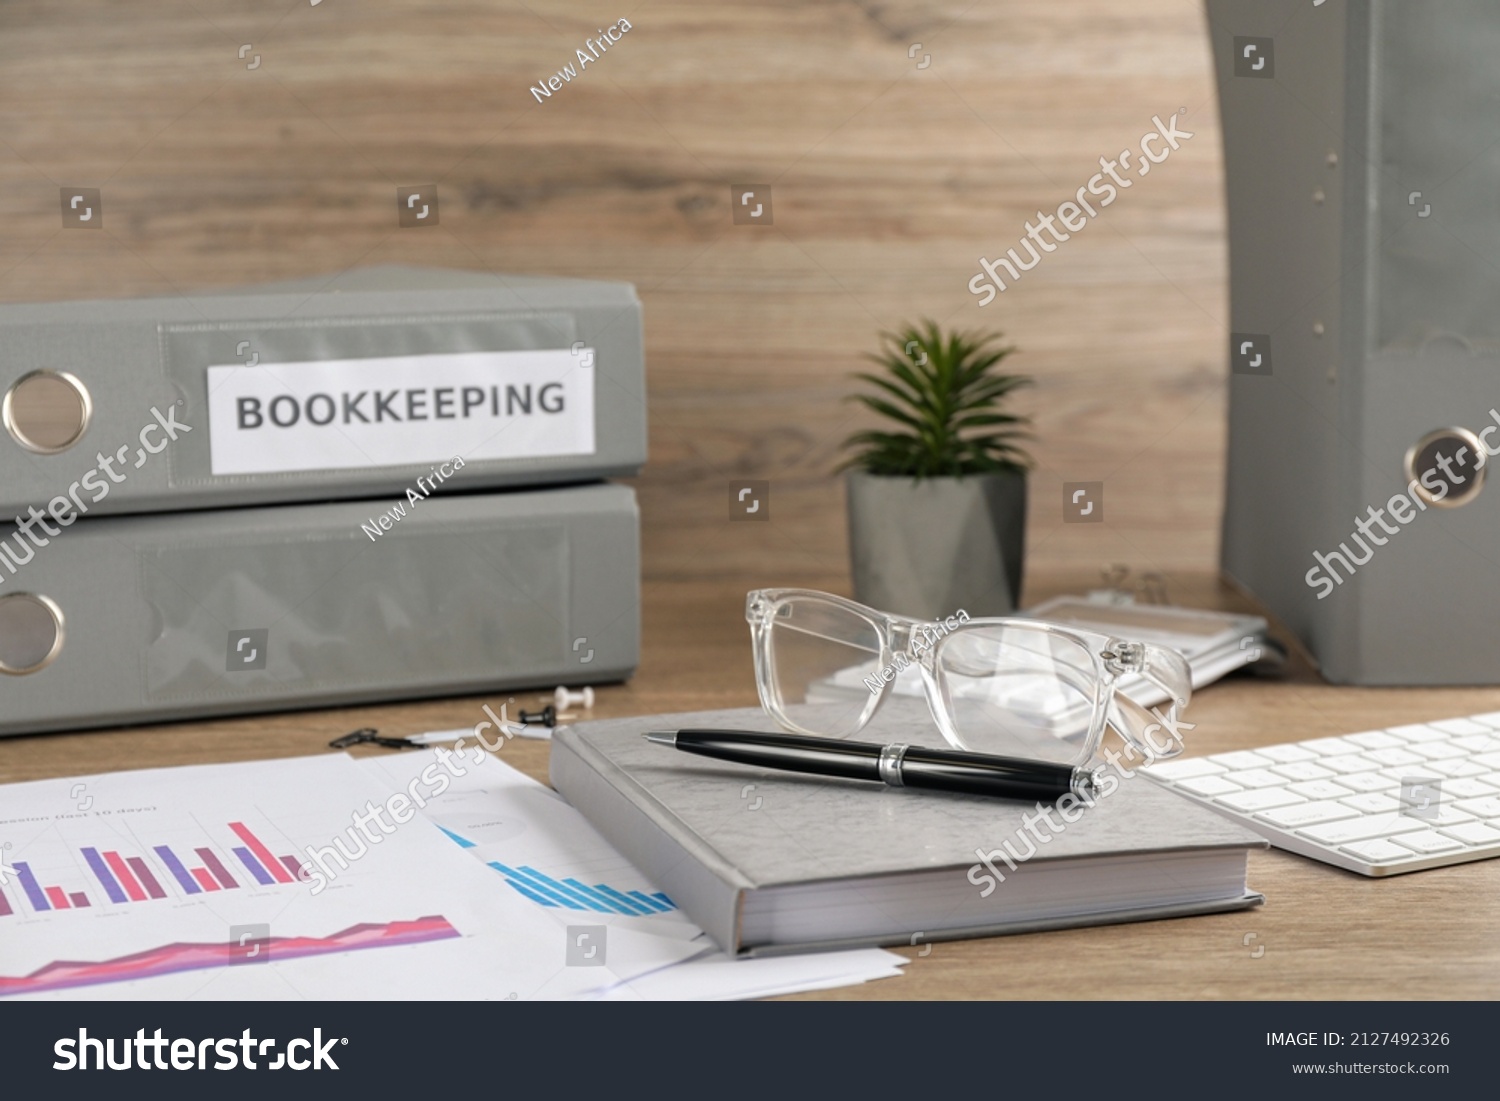 Bookkeeper's workplace with folders and documents on table #2127492326